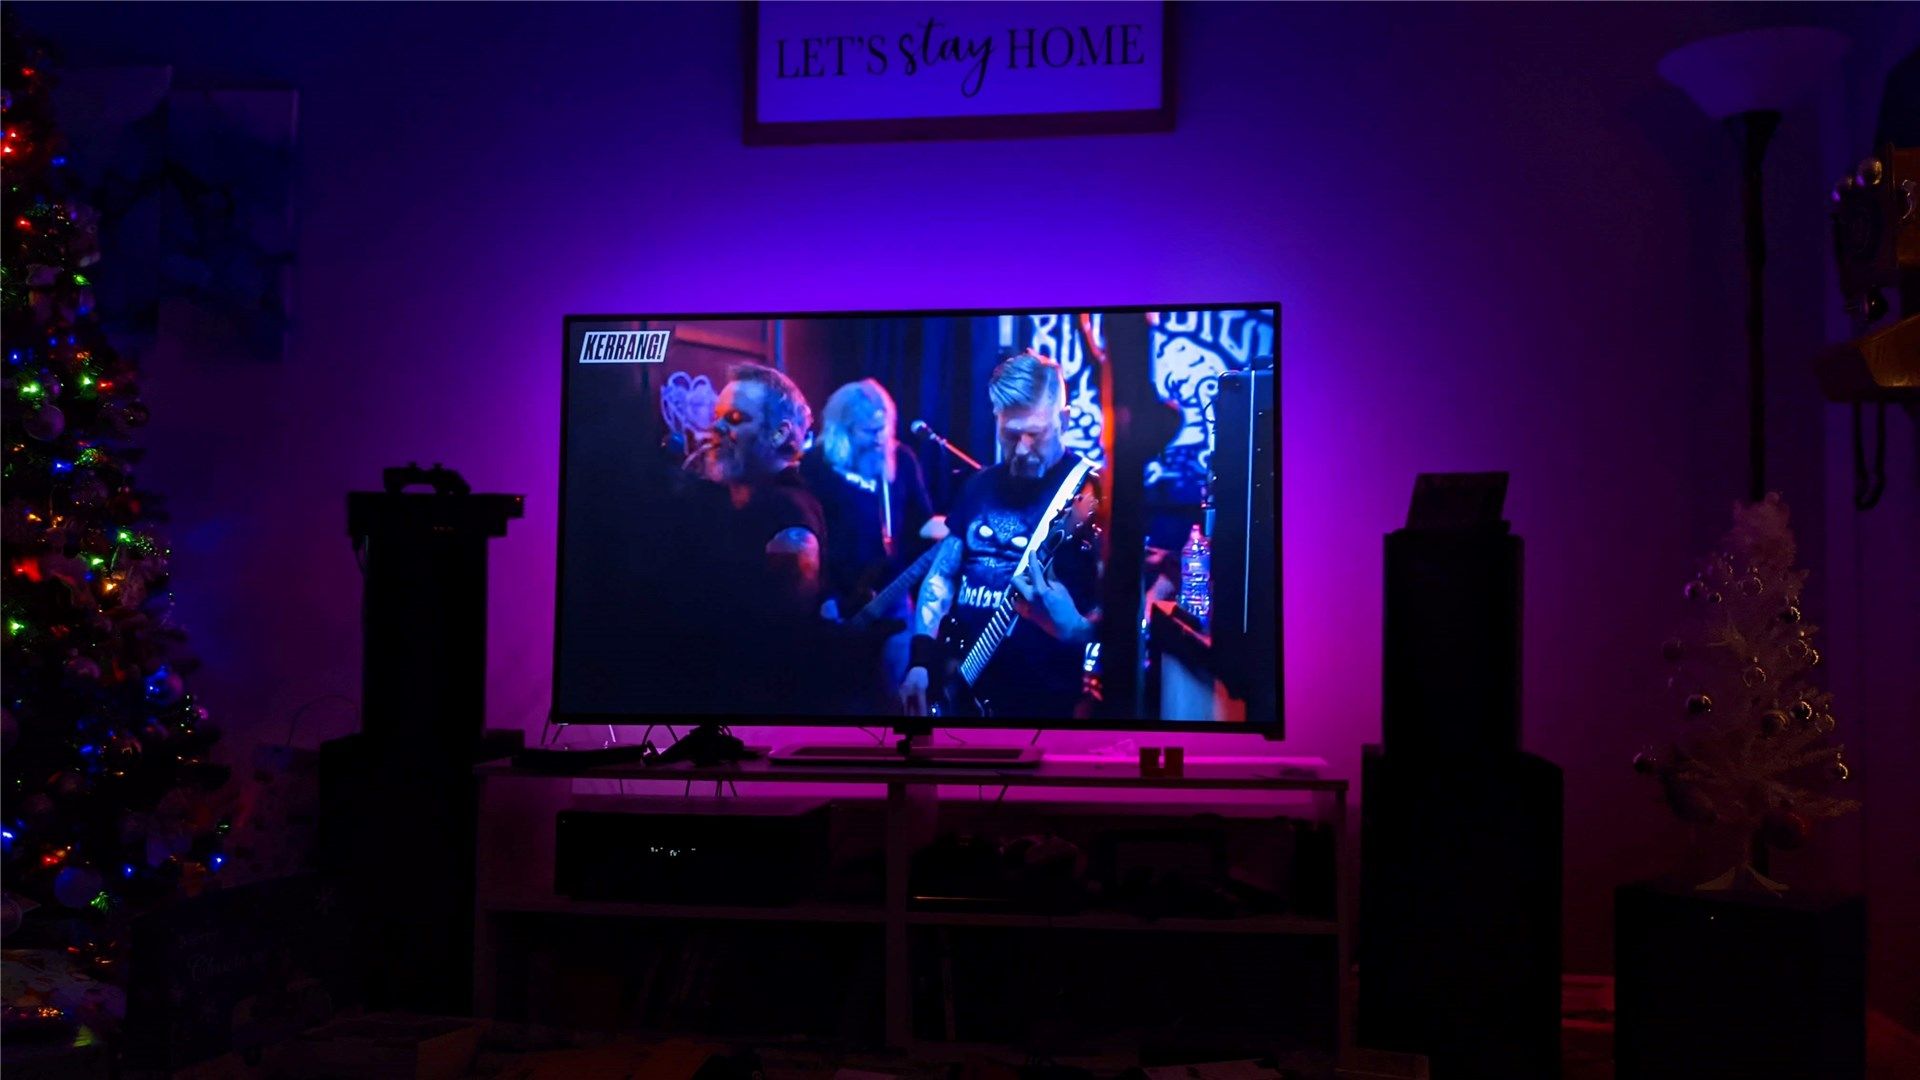 Govee Immersion Kit Wi-Fi TV Backlight + Light Bars Review: Makes